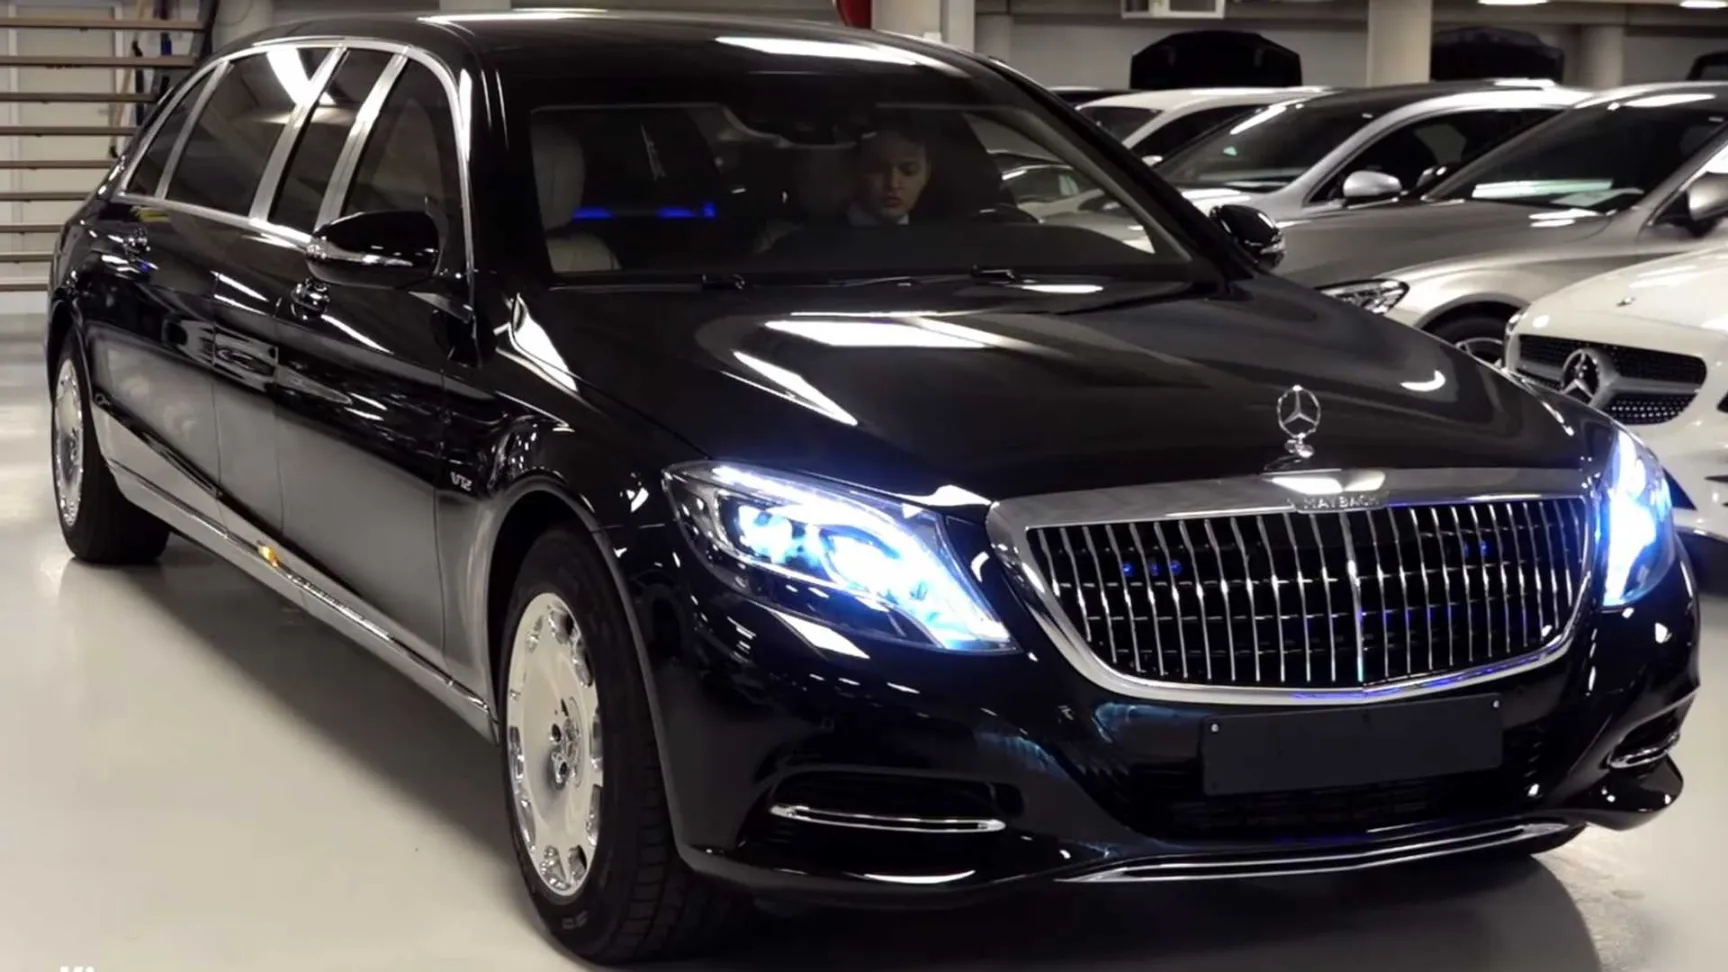 Mercedes Benz s600 for sale in Kenya - 2019 Maybach Model